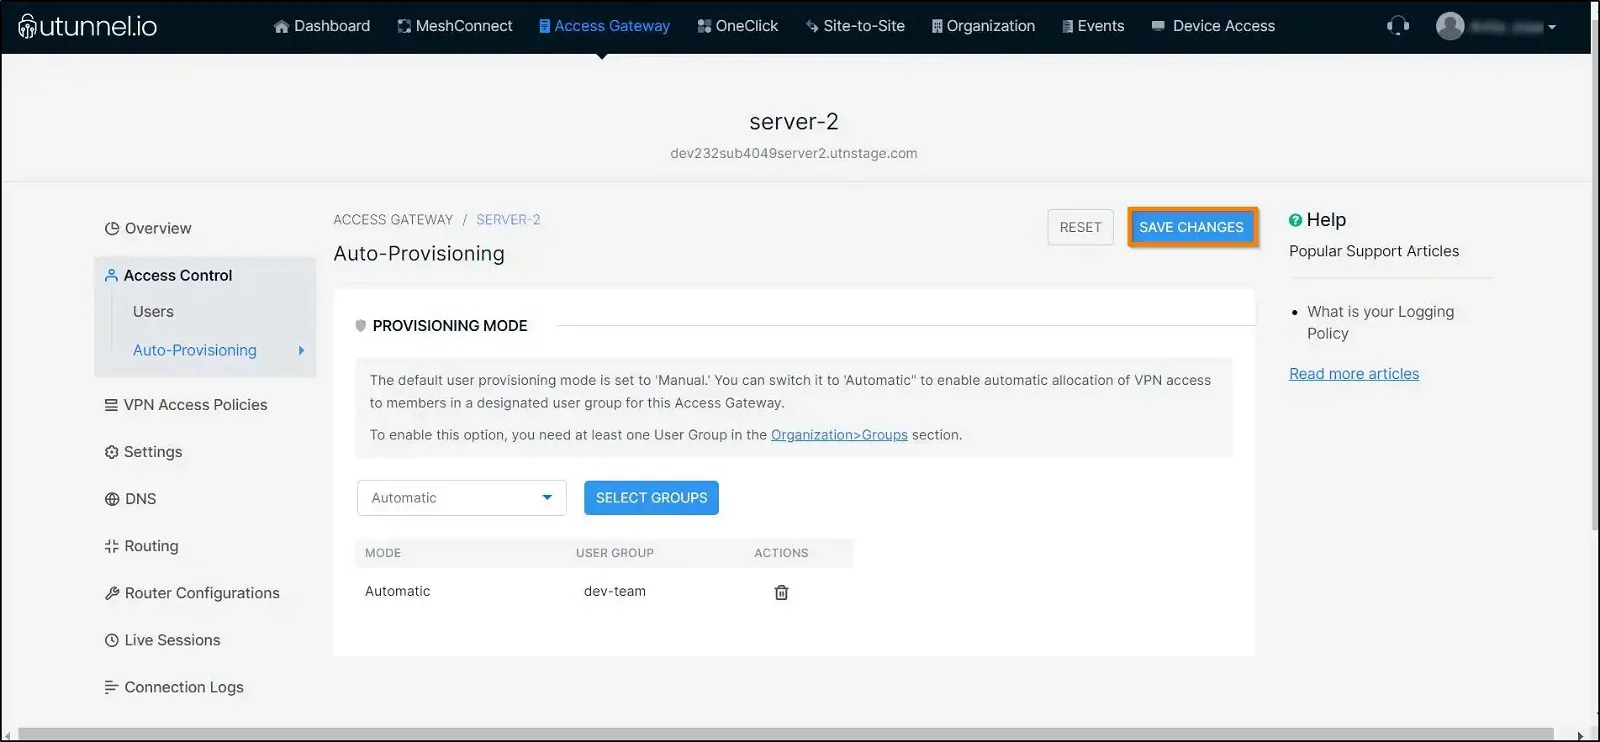 How to enable user provisioning on a server user provisioning